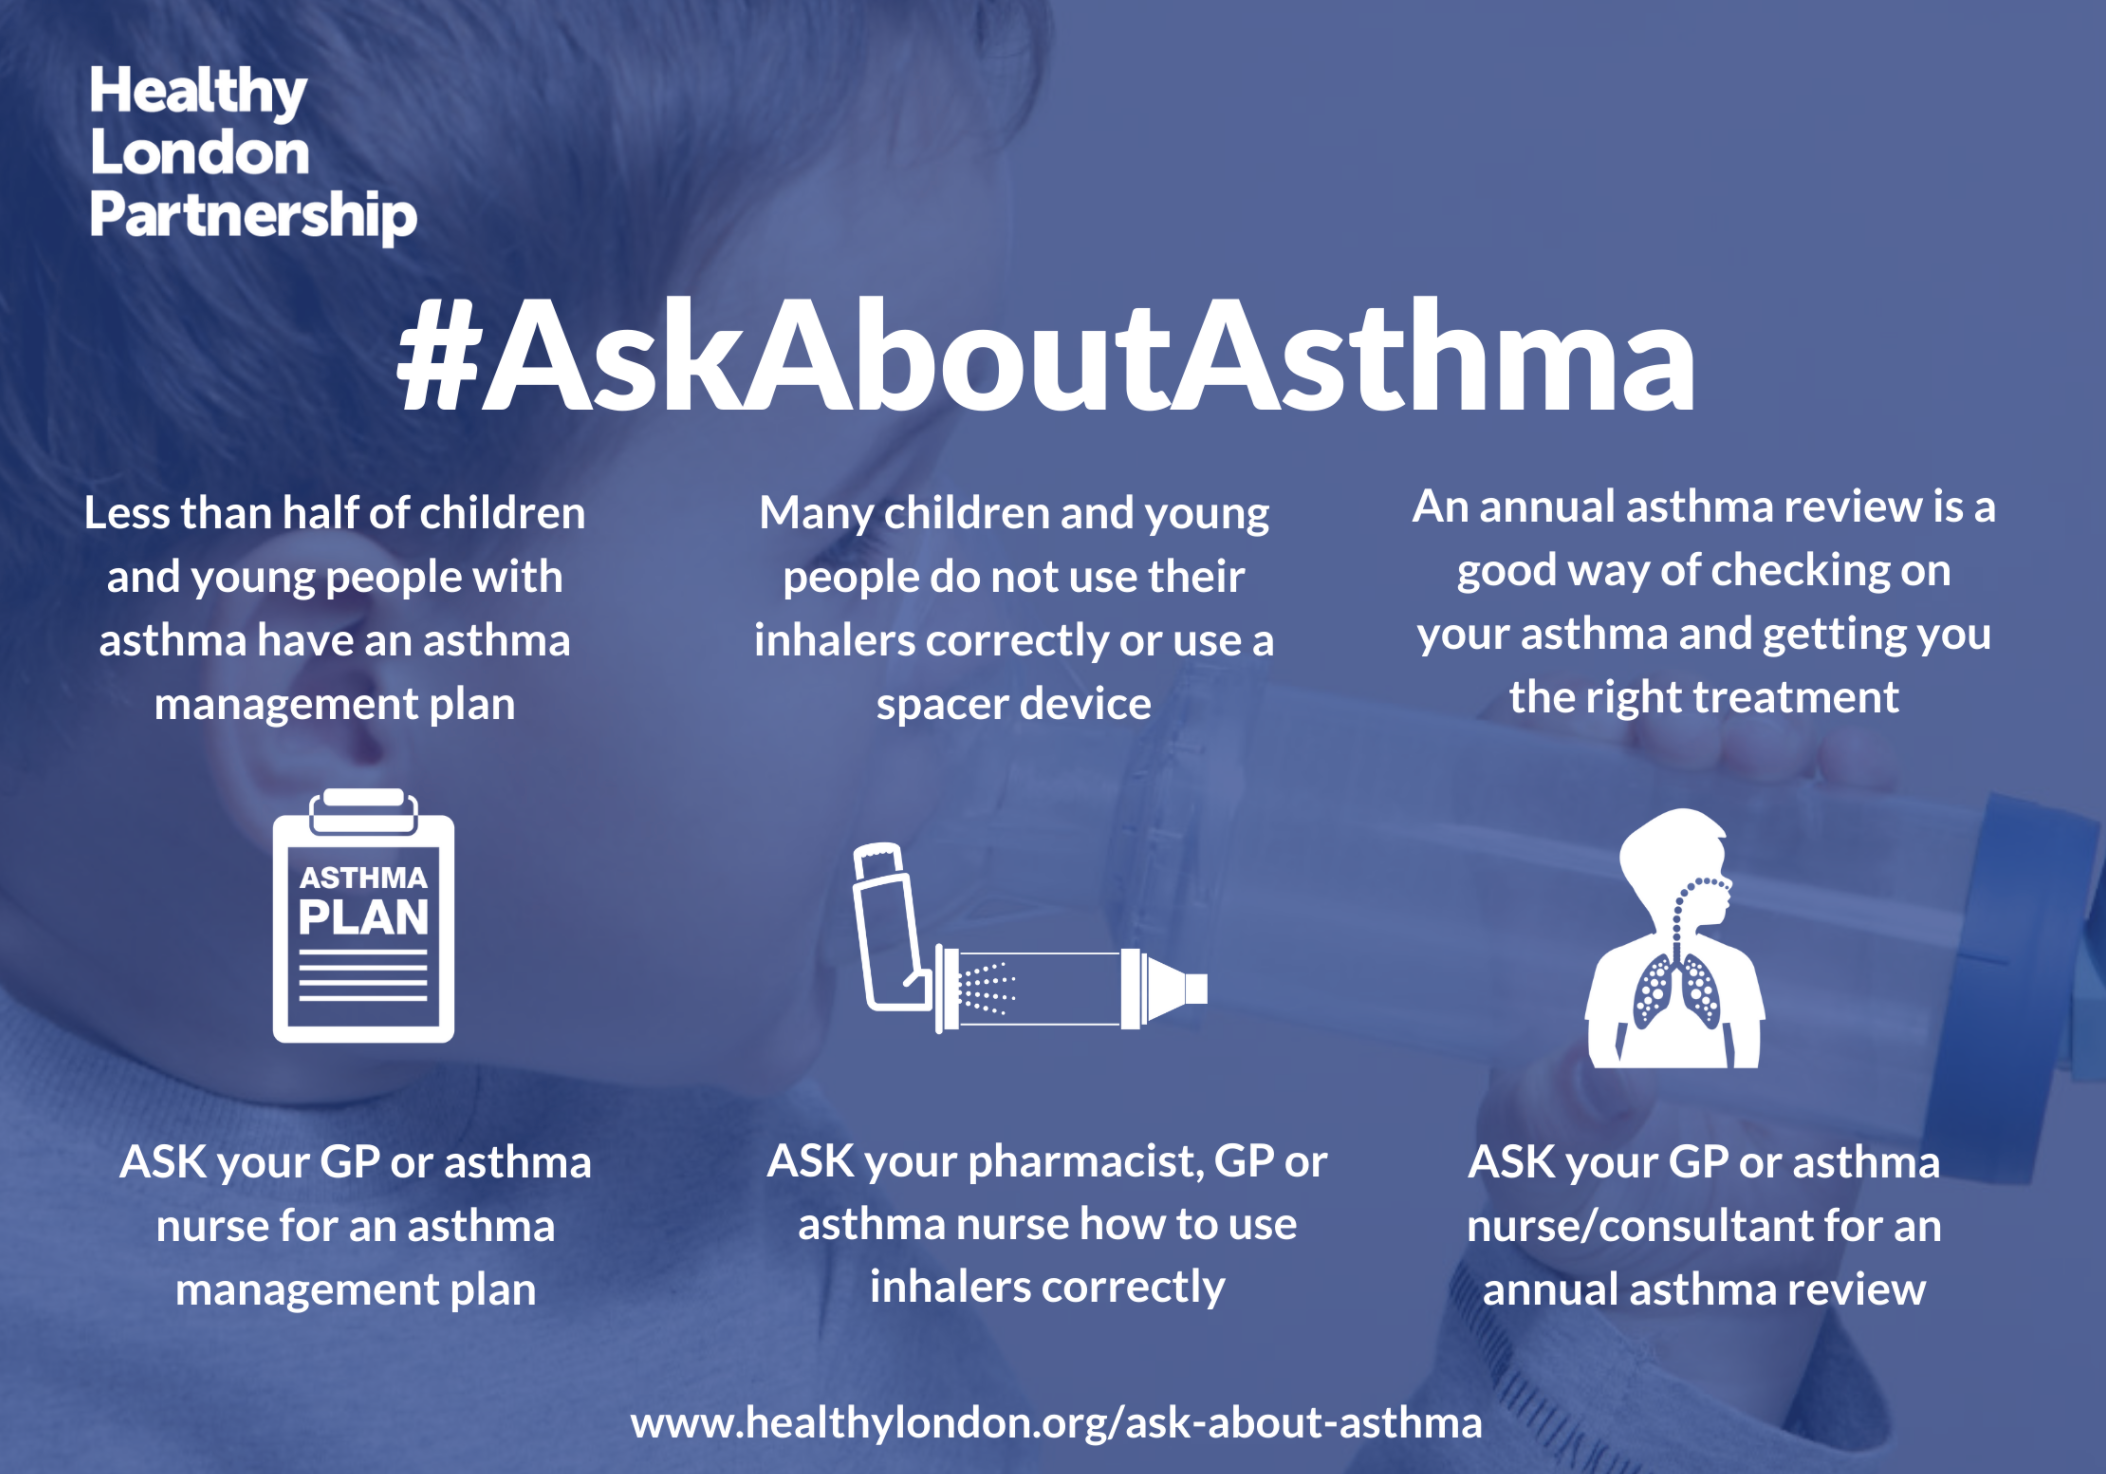 AskAboutAsthma featured image